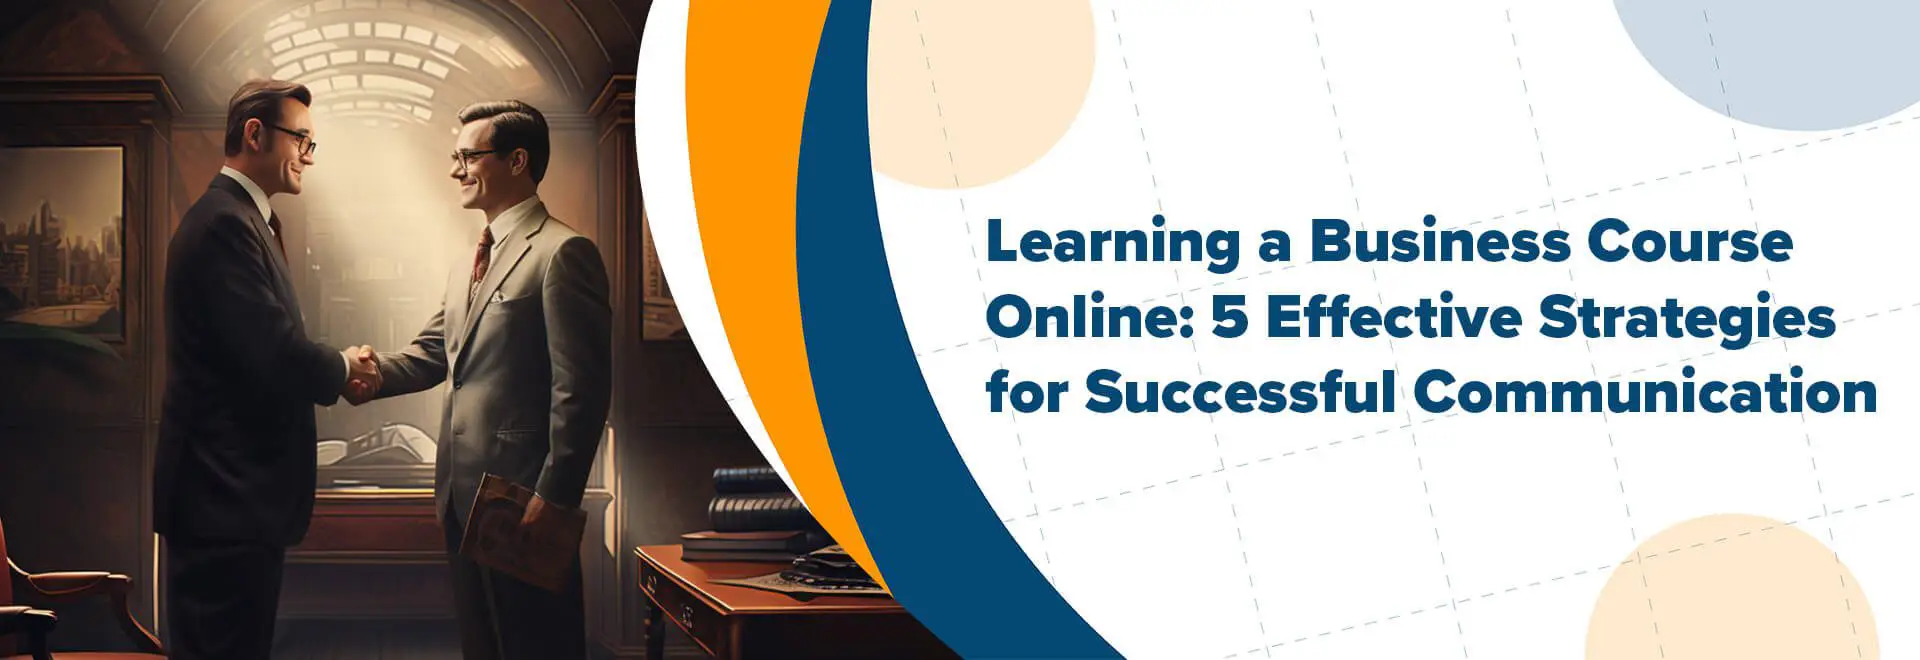 Learning a Business English Course Online: 5 Effective Strategies for Successful Communication